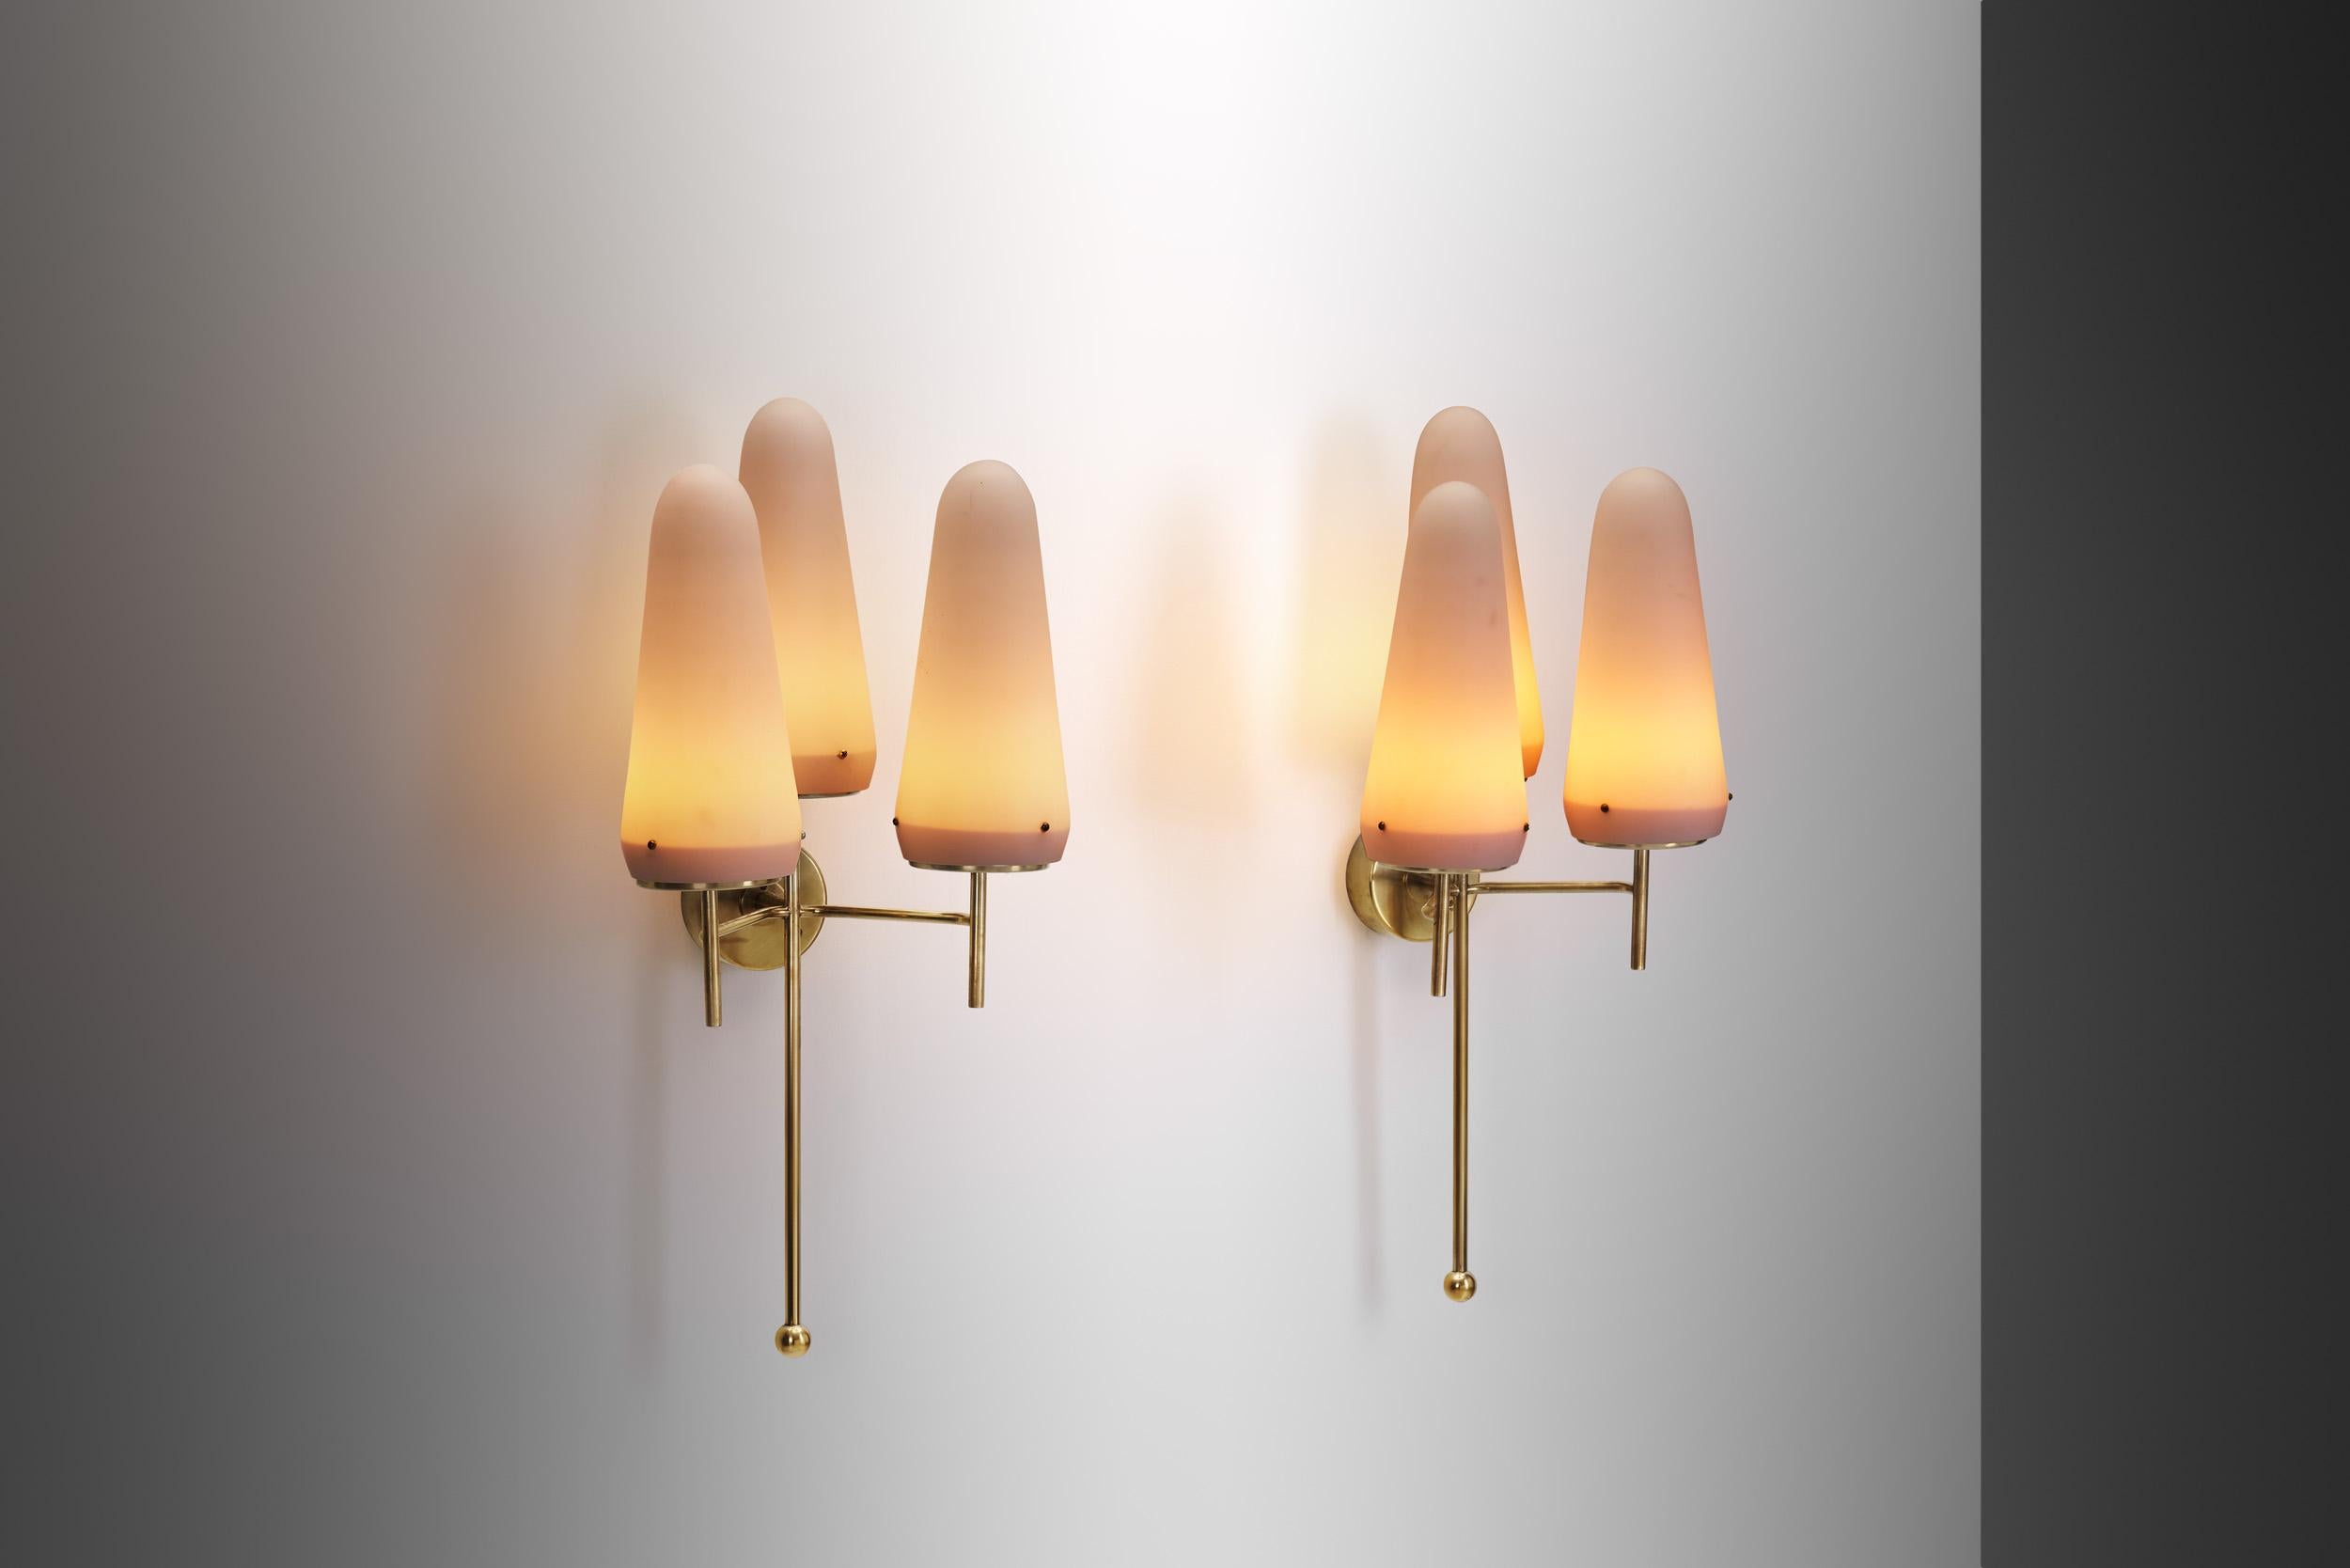 Swedish mid-20th century lighting design is infinitely captivating, thanks to it featuring one-of-a-kind models crafted by renowned architects and craftsmen following in the footsteps of Swedish classical design and designers, with unmistakeably